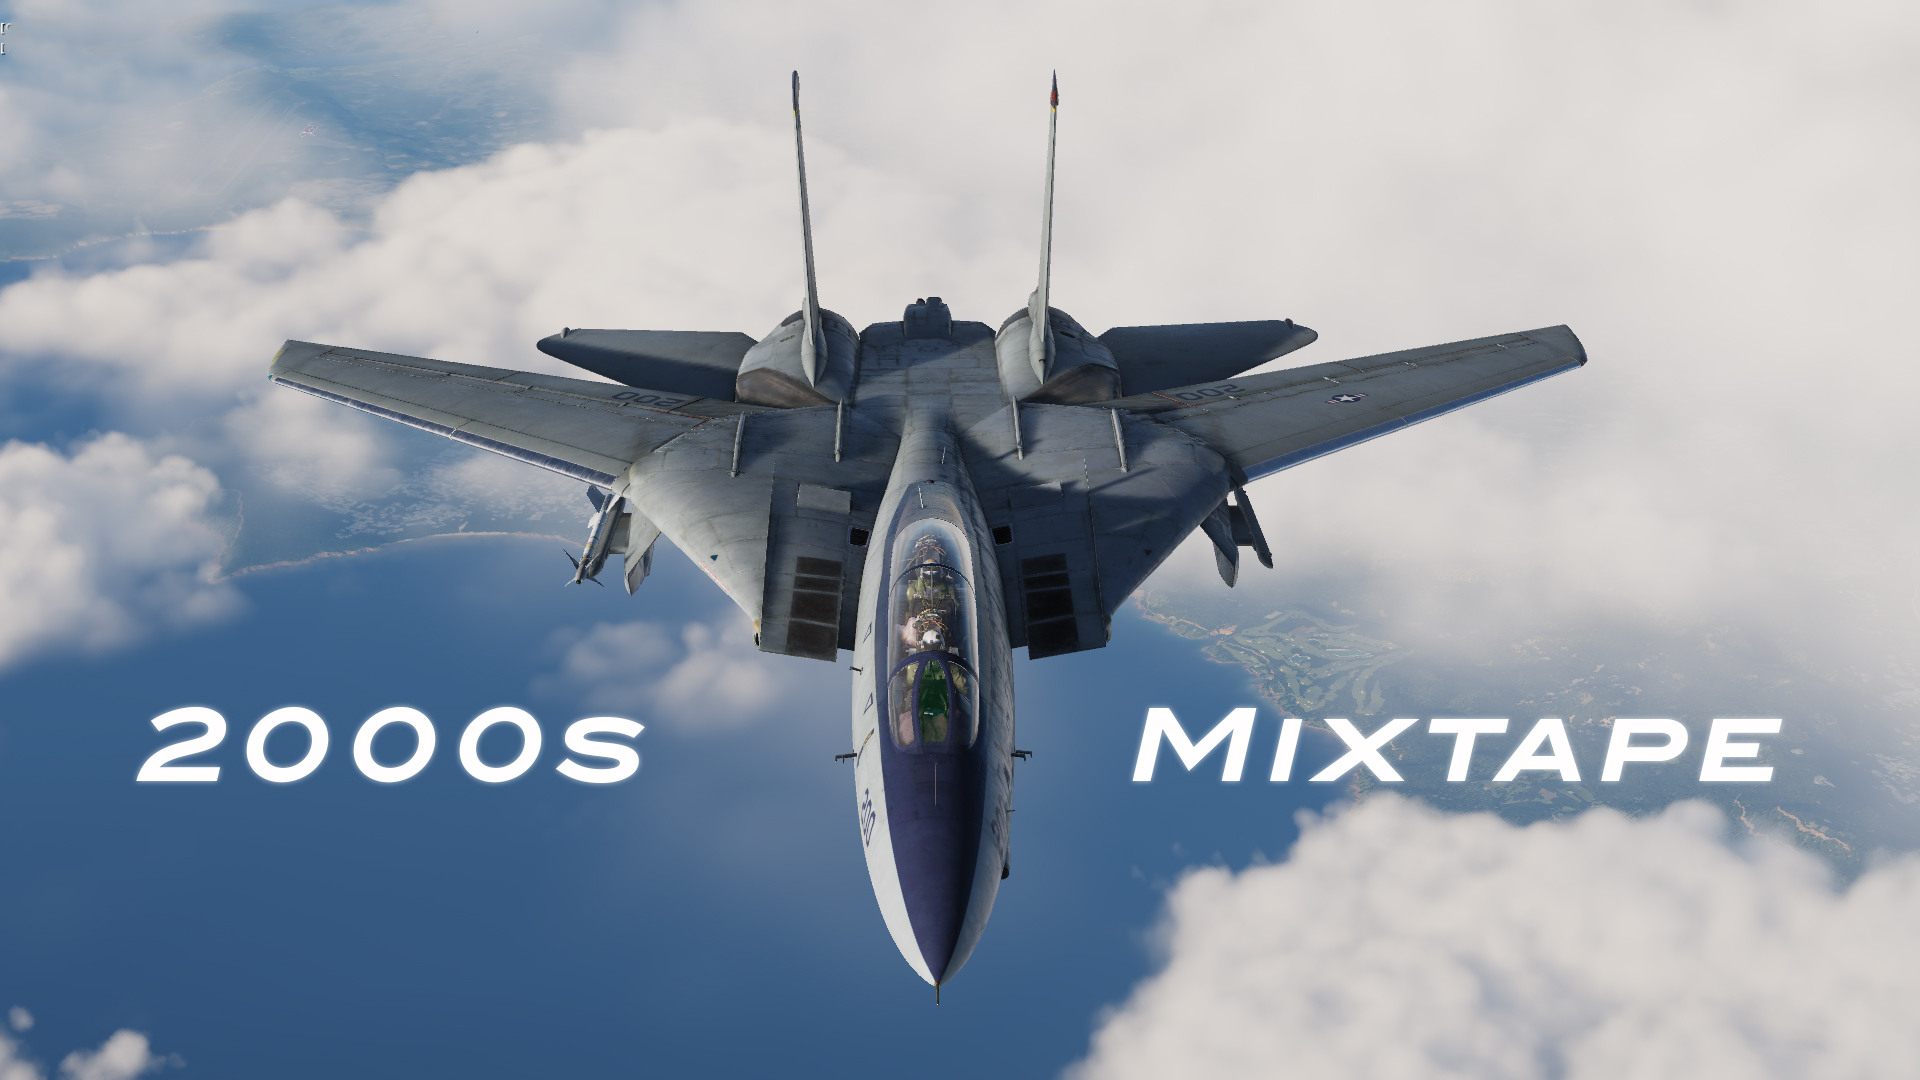 Early 2000s Mixtape for the F-14 Tomcat